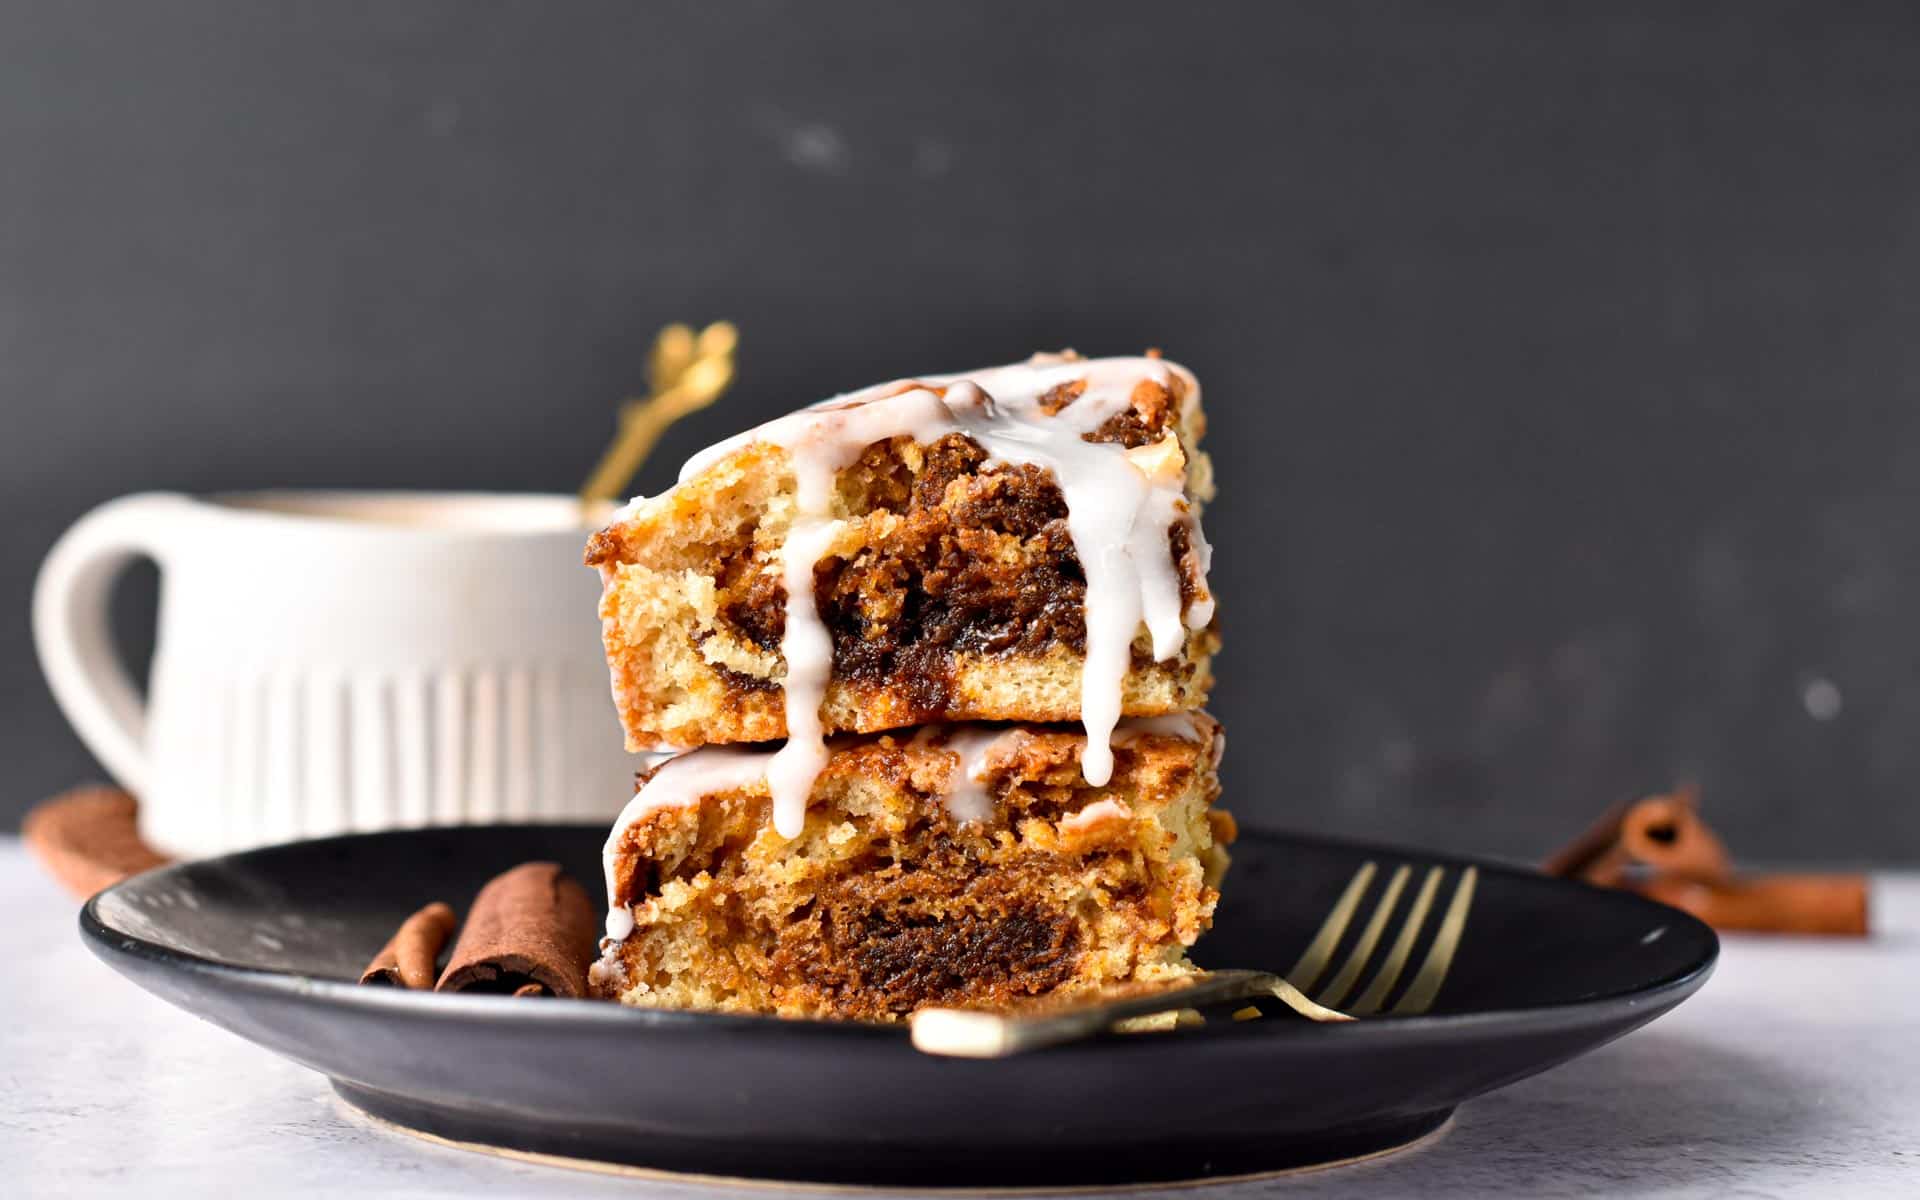 This Vegan Coffee Cake is a moist, buttery vanilla cake filled with a sweet cinnamon sugar and topped with a crunchy walnuts cinnamon streusel. It’s the perfect week-end breakfast cake to bring all the family around the table.